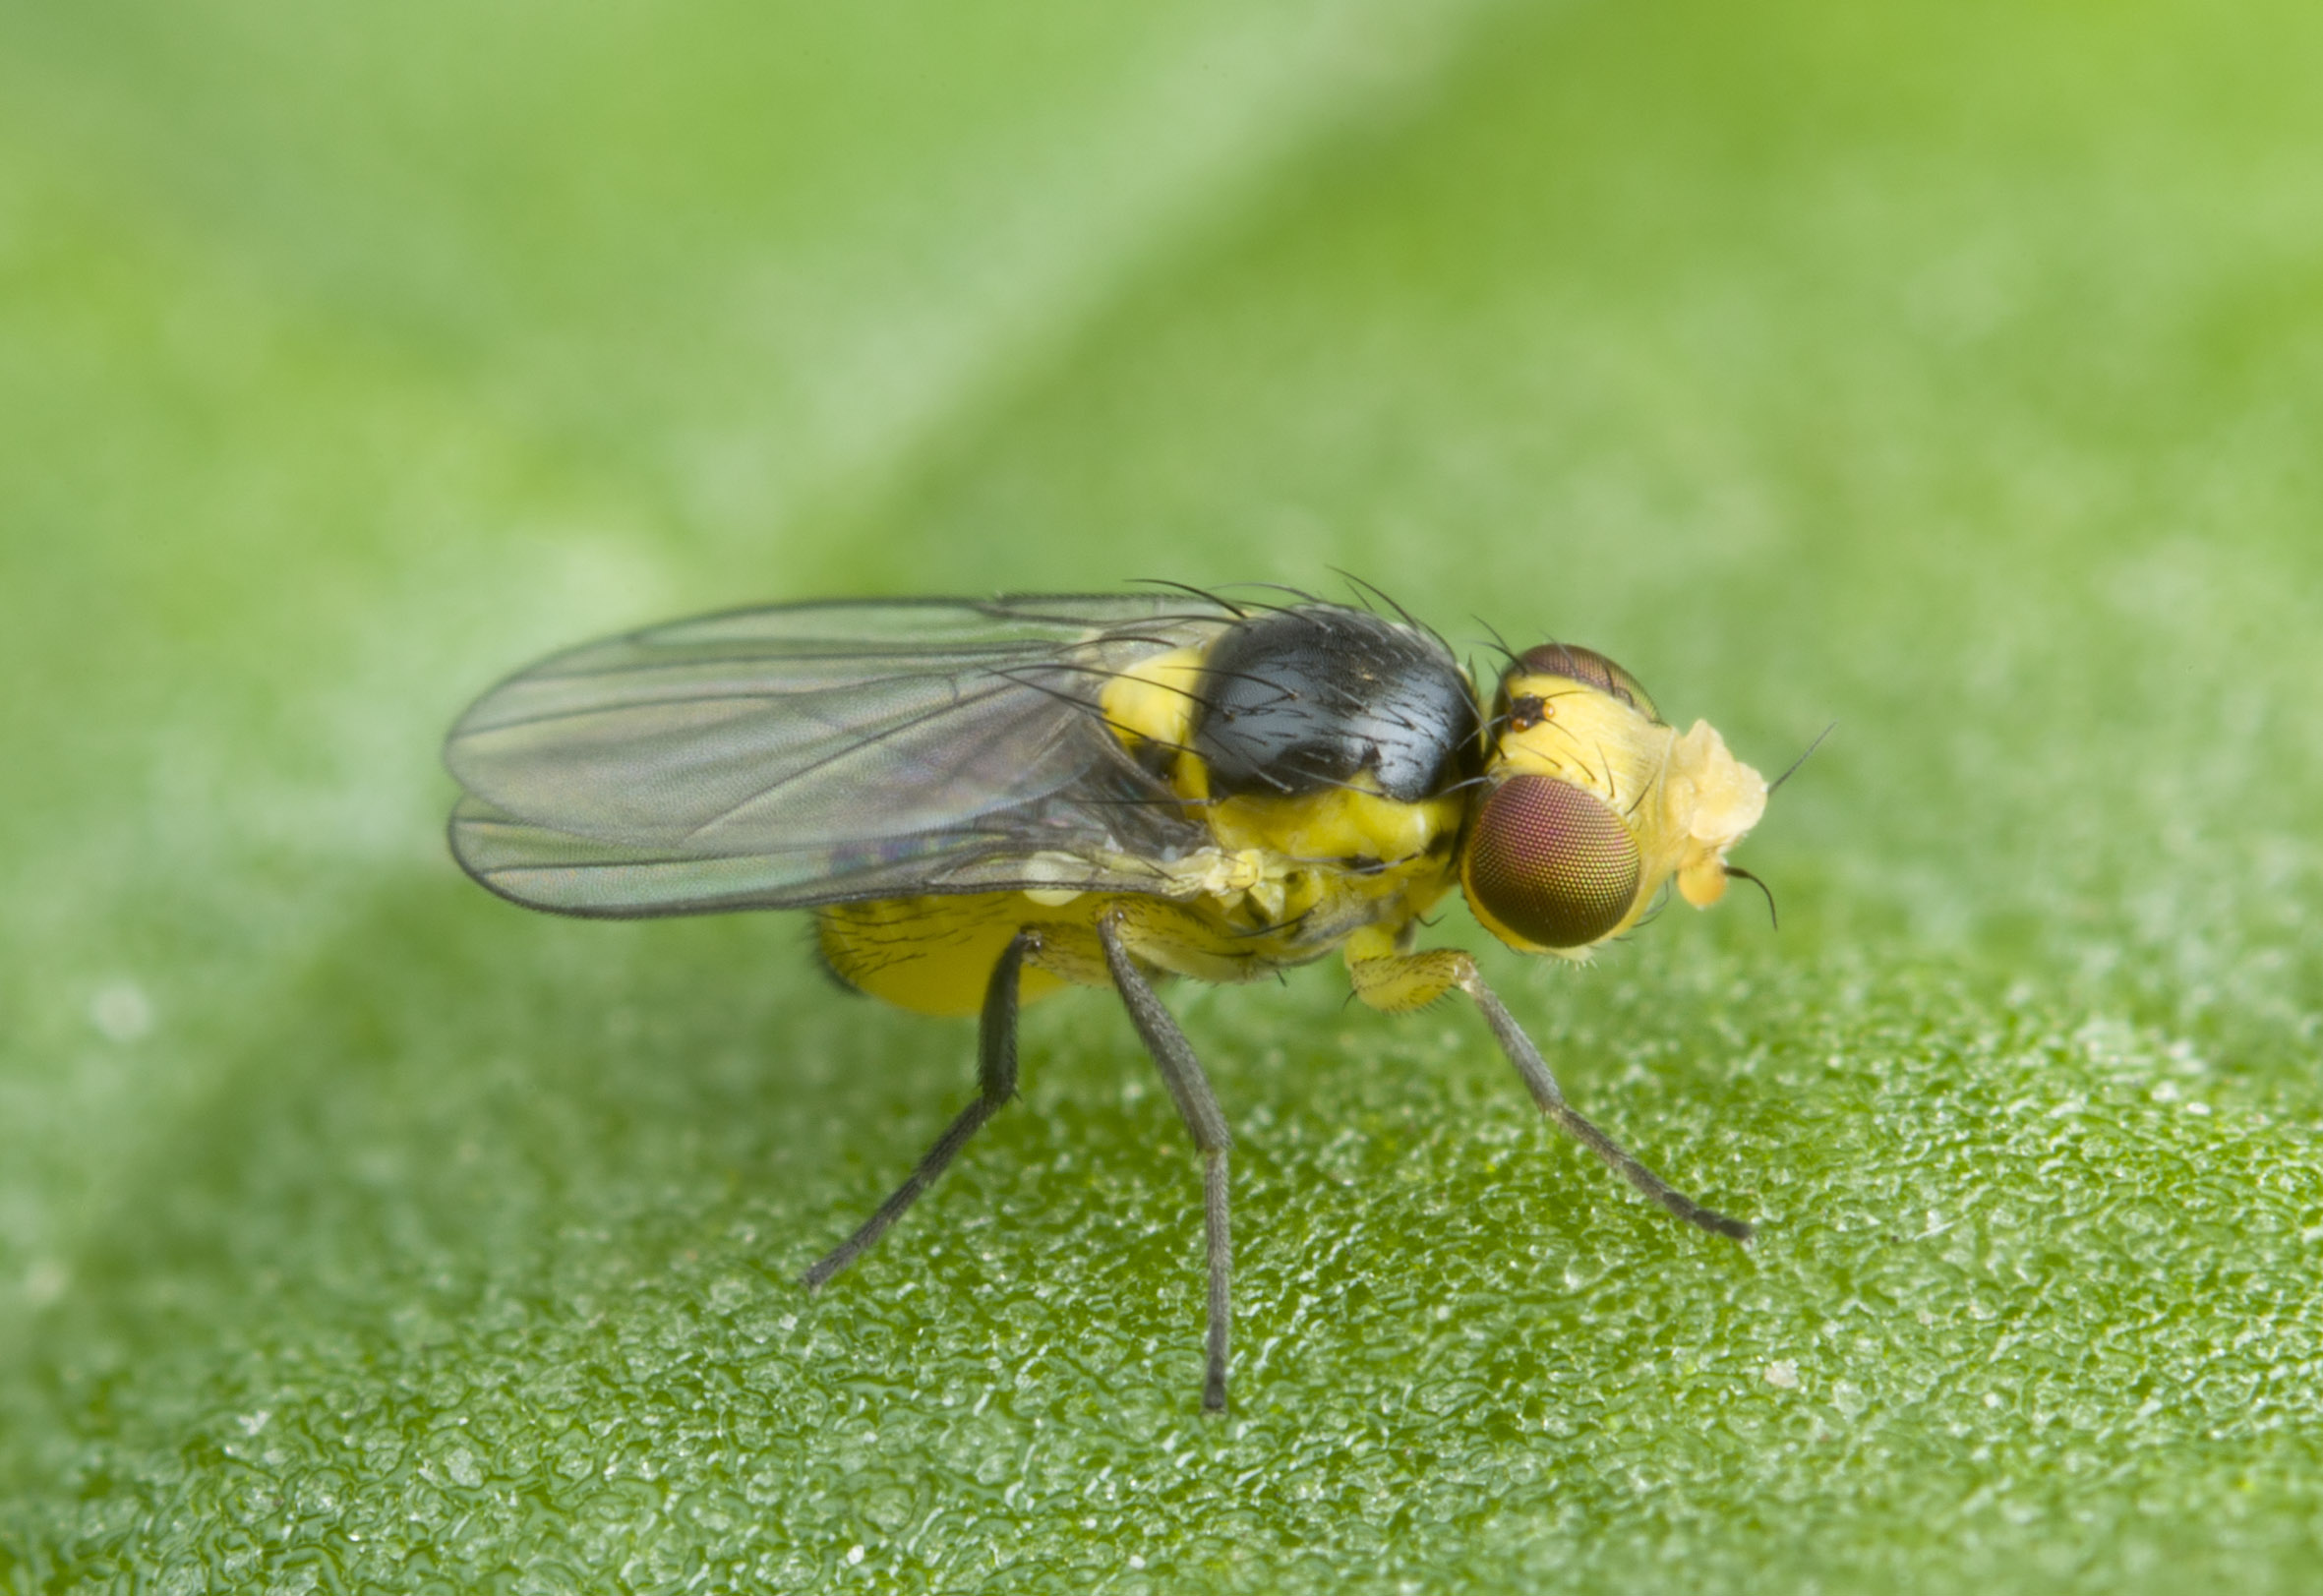 Liriomyza flies are about 2mm long and not easily seen